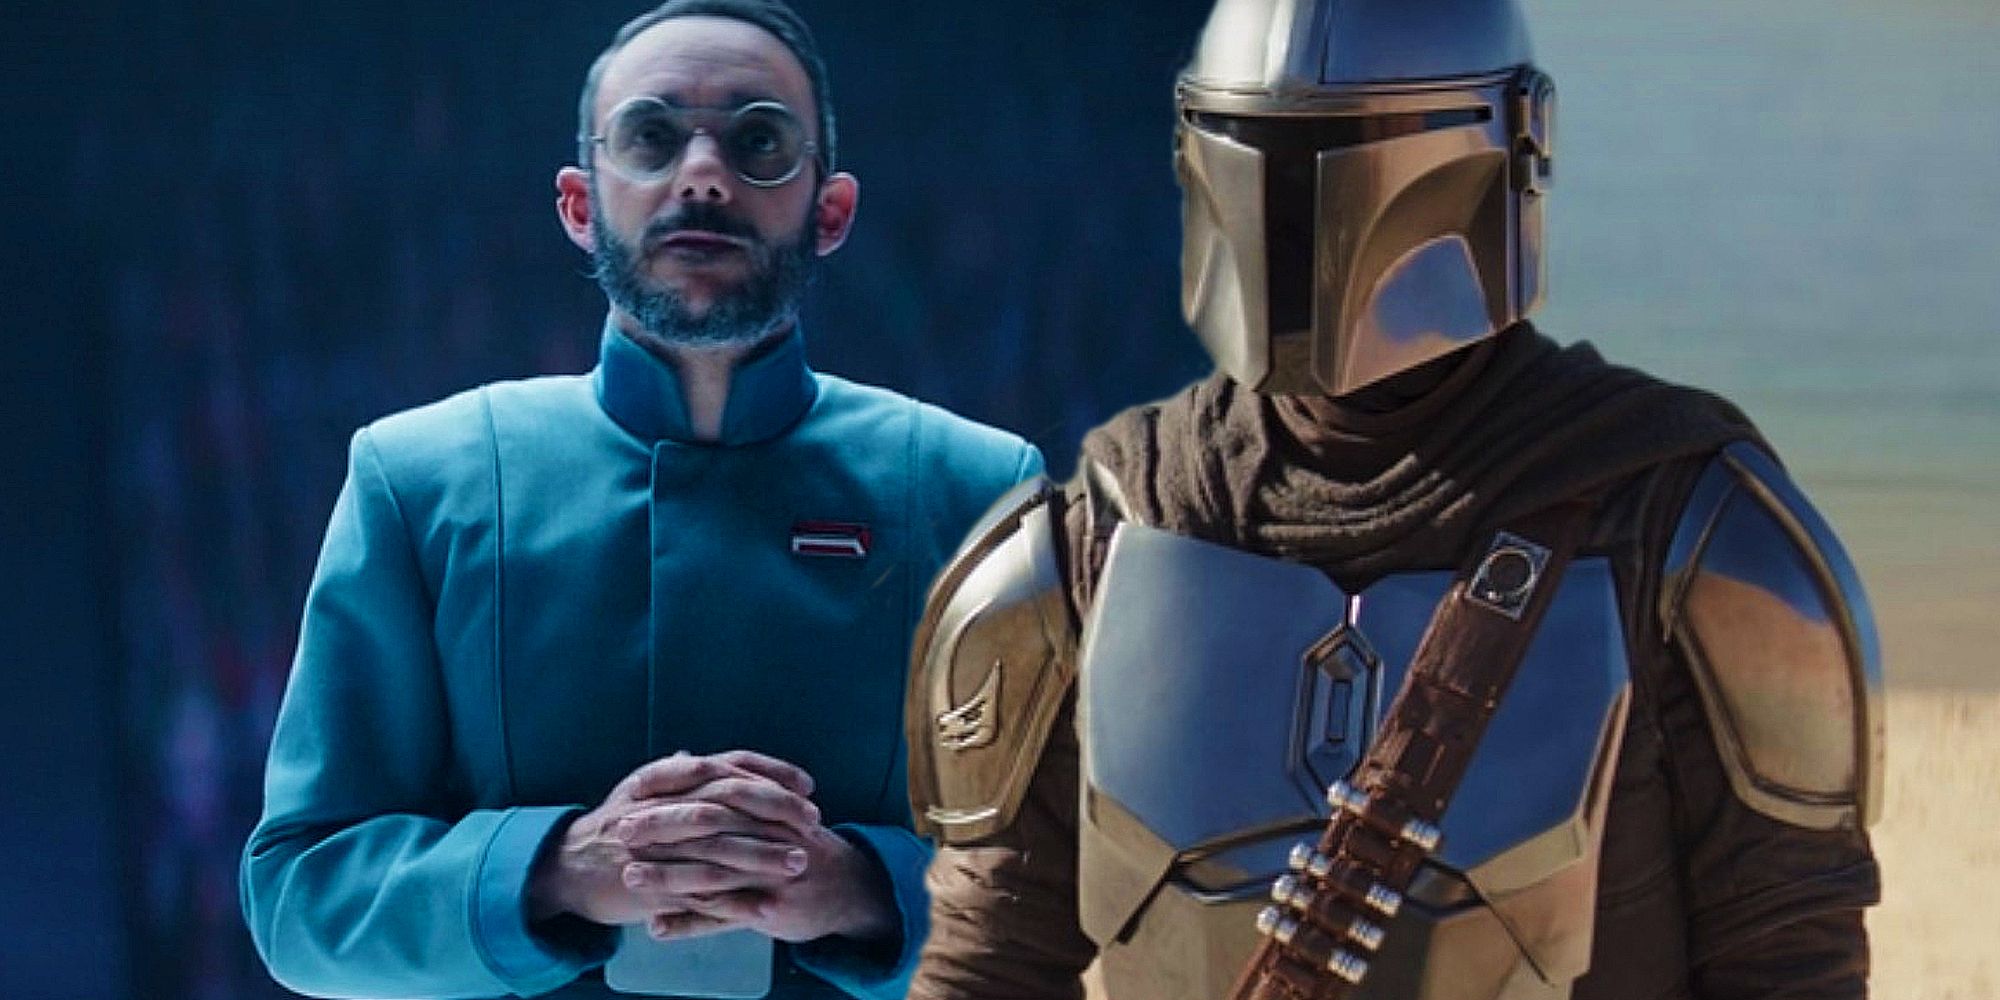 New episode of The Mandalorian divides fans as it becomes lowest